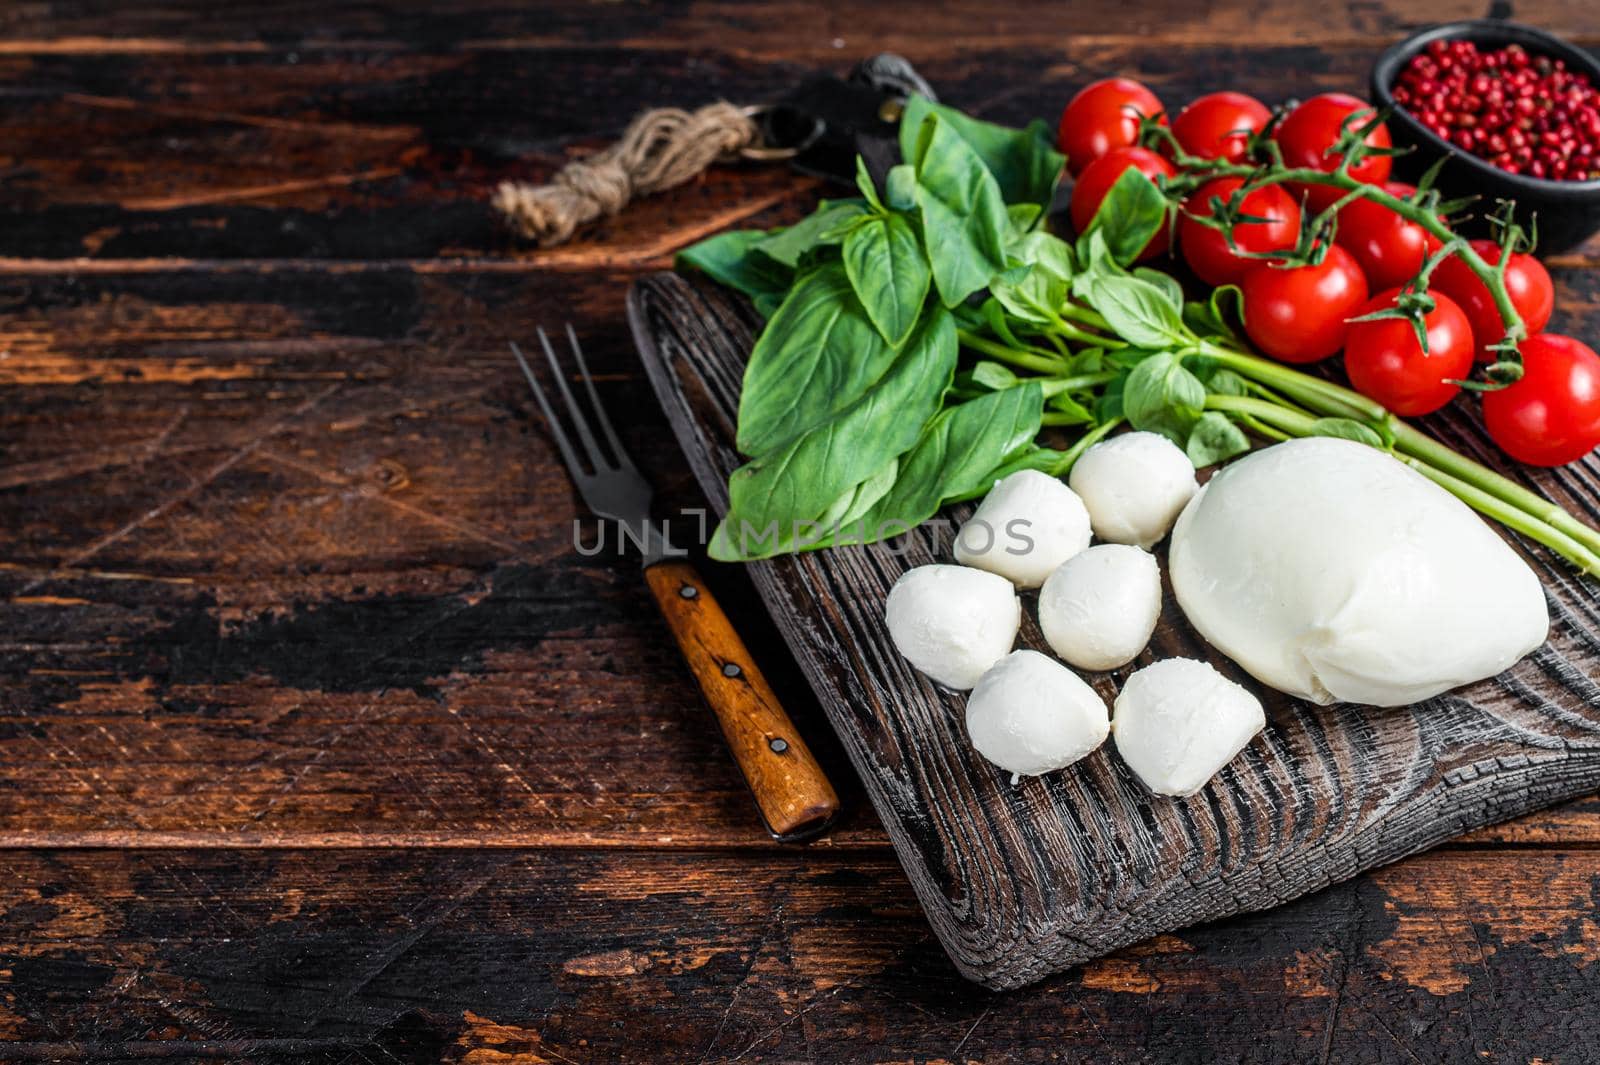 Mozzarella cheese, basil and tomato cherry on wooden board, Ingredients for Caprese salad. Dark wooden background. Top view. Copy space by Composter